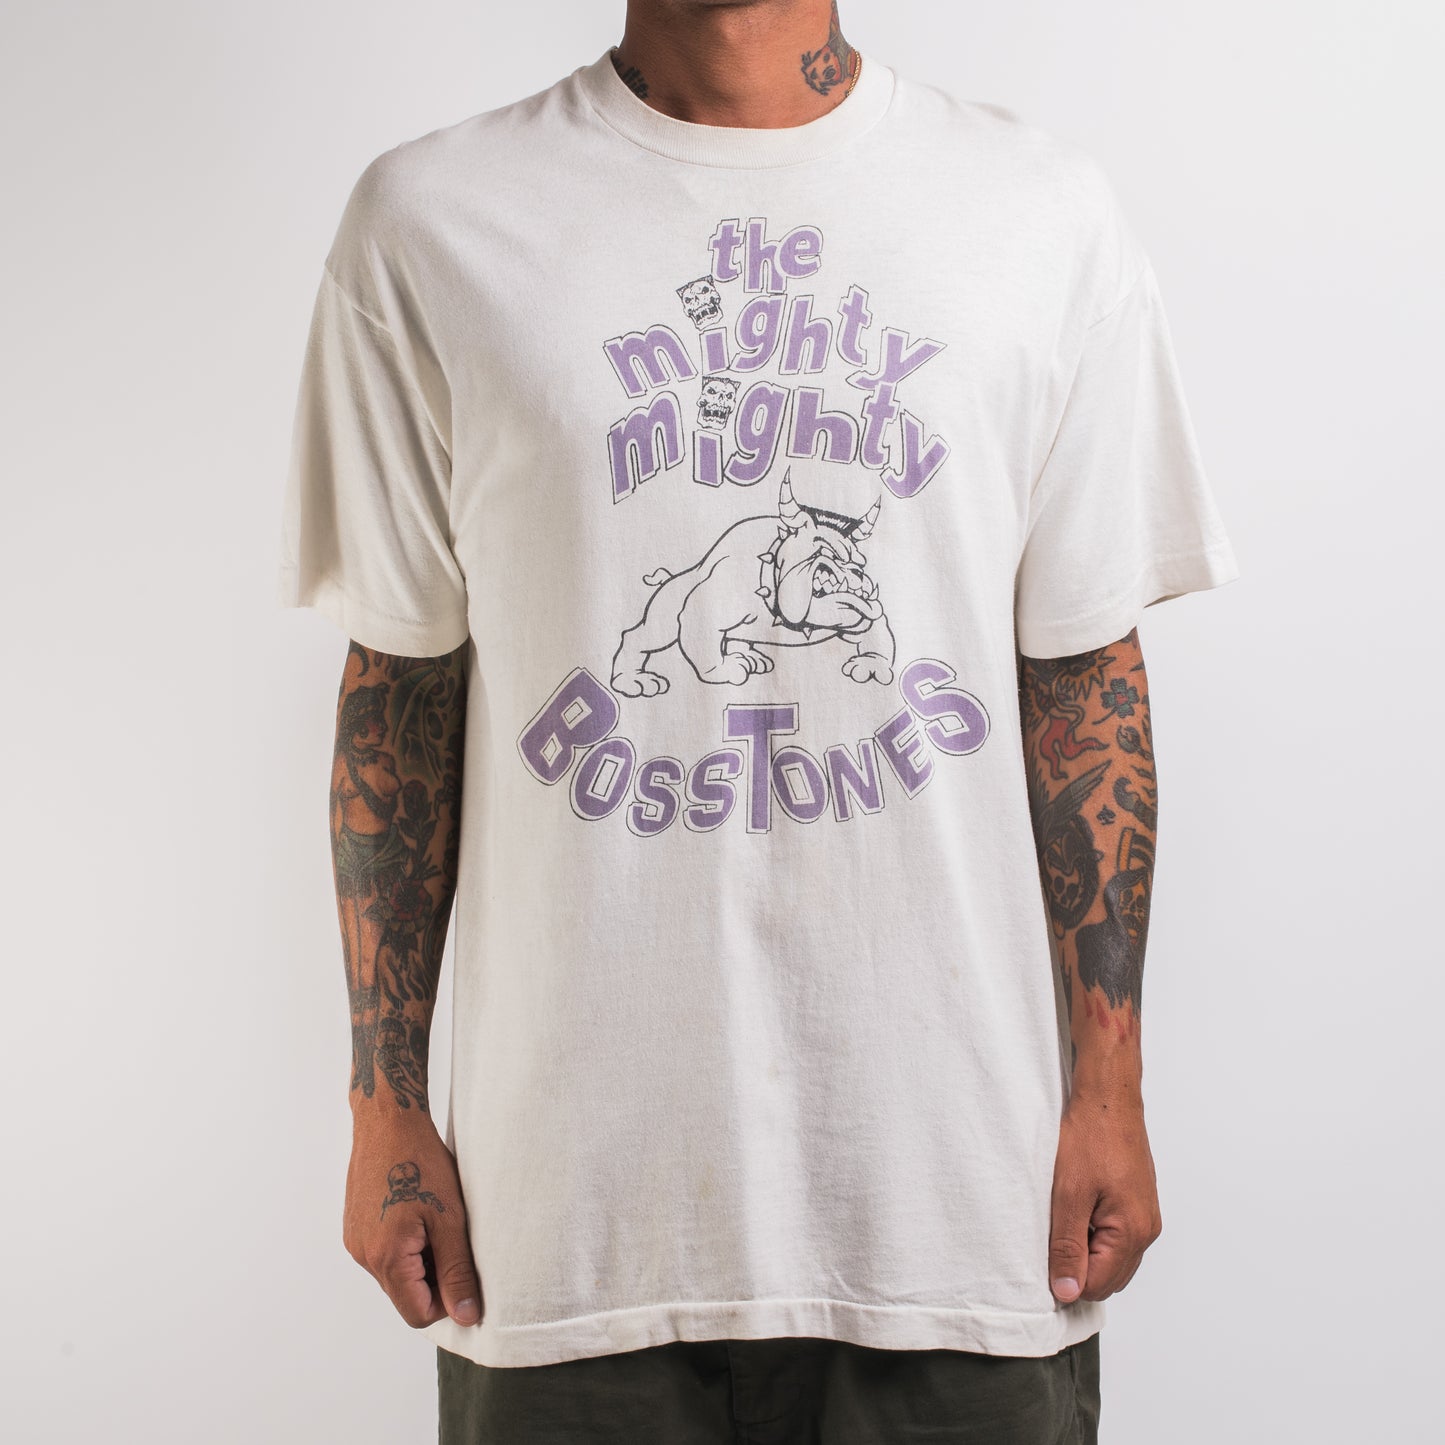 Vintage 90’s The Mighty Mighty Bostones T-Shirt